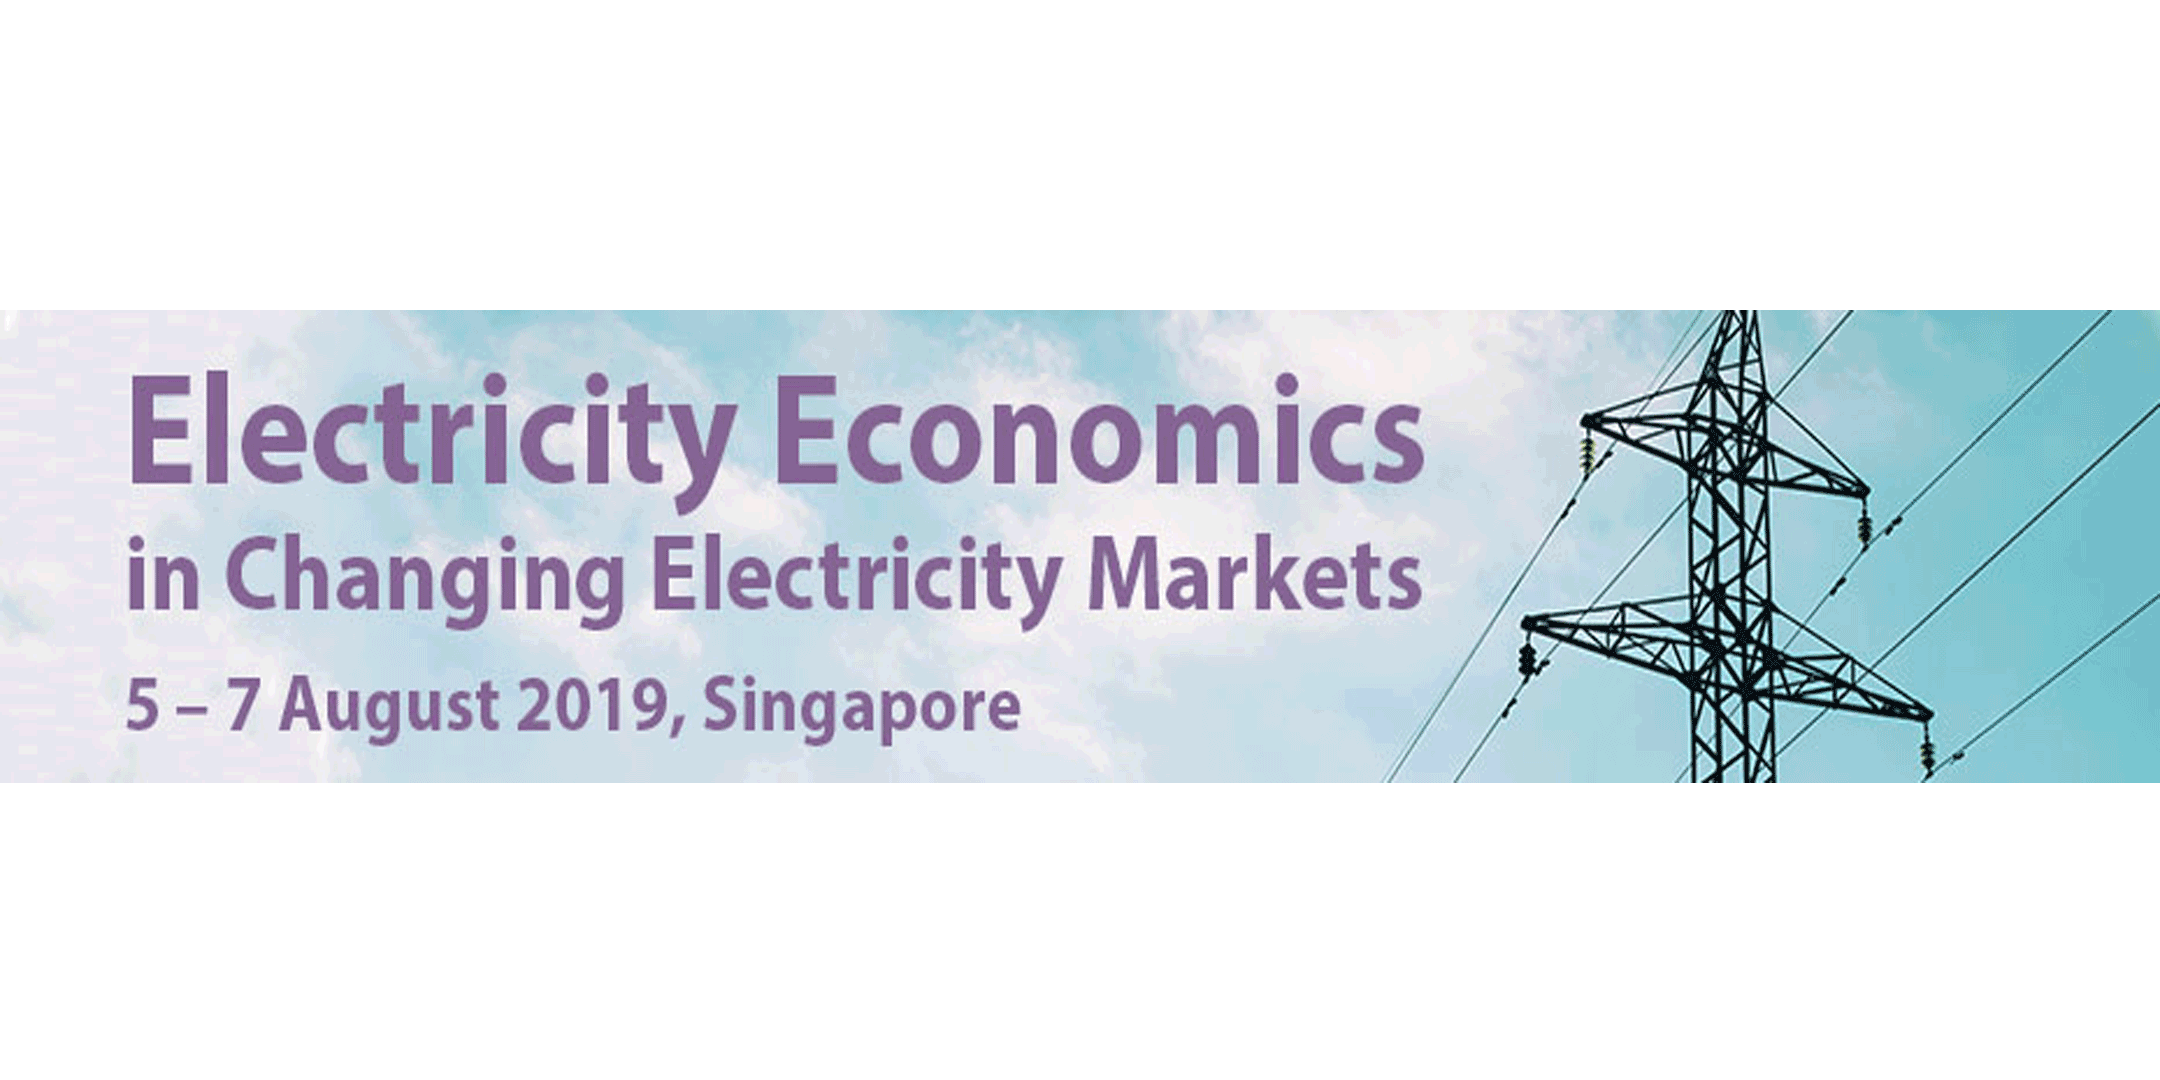 Electricity Economics in Changing Electricity Markets, Singapore